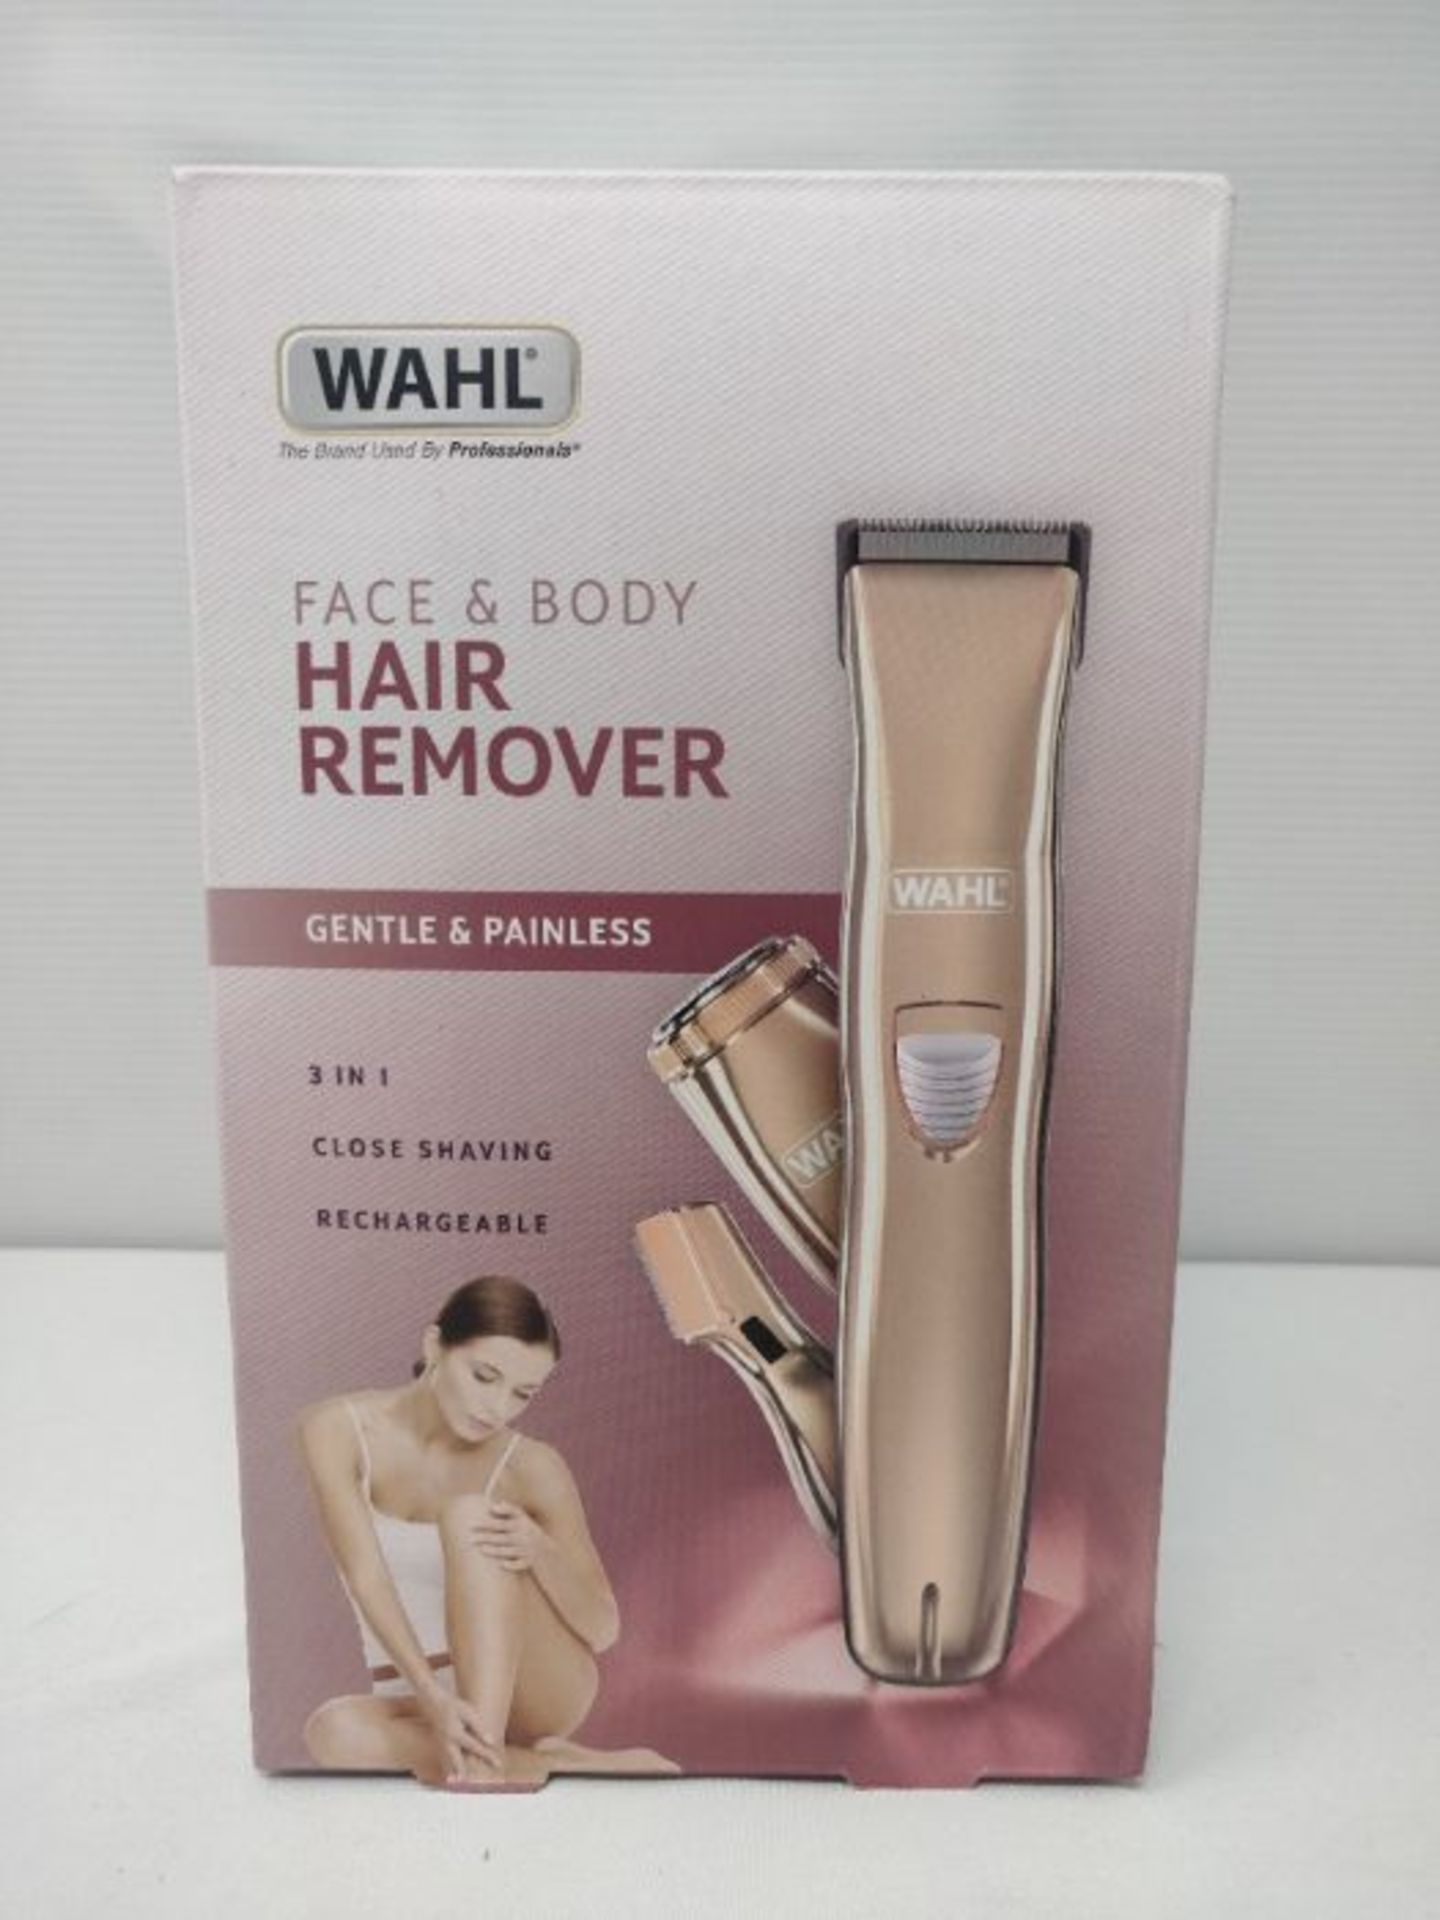 Wahl 3-in-1 Ladies Face and Body Hair Remover - Female Rotary Shaver and Eyebrow Shape - Image 2 of 2